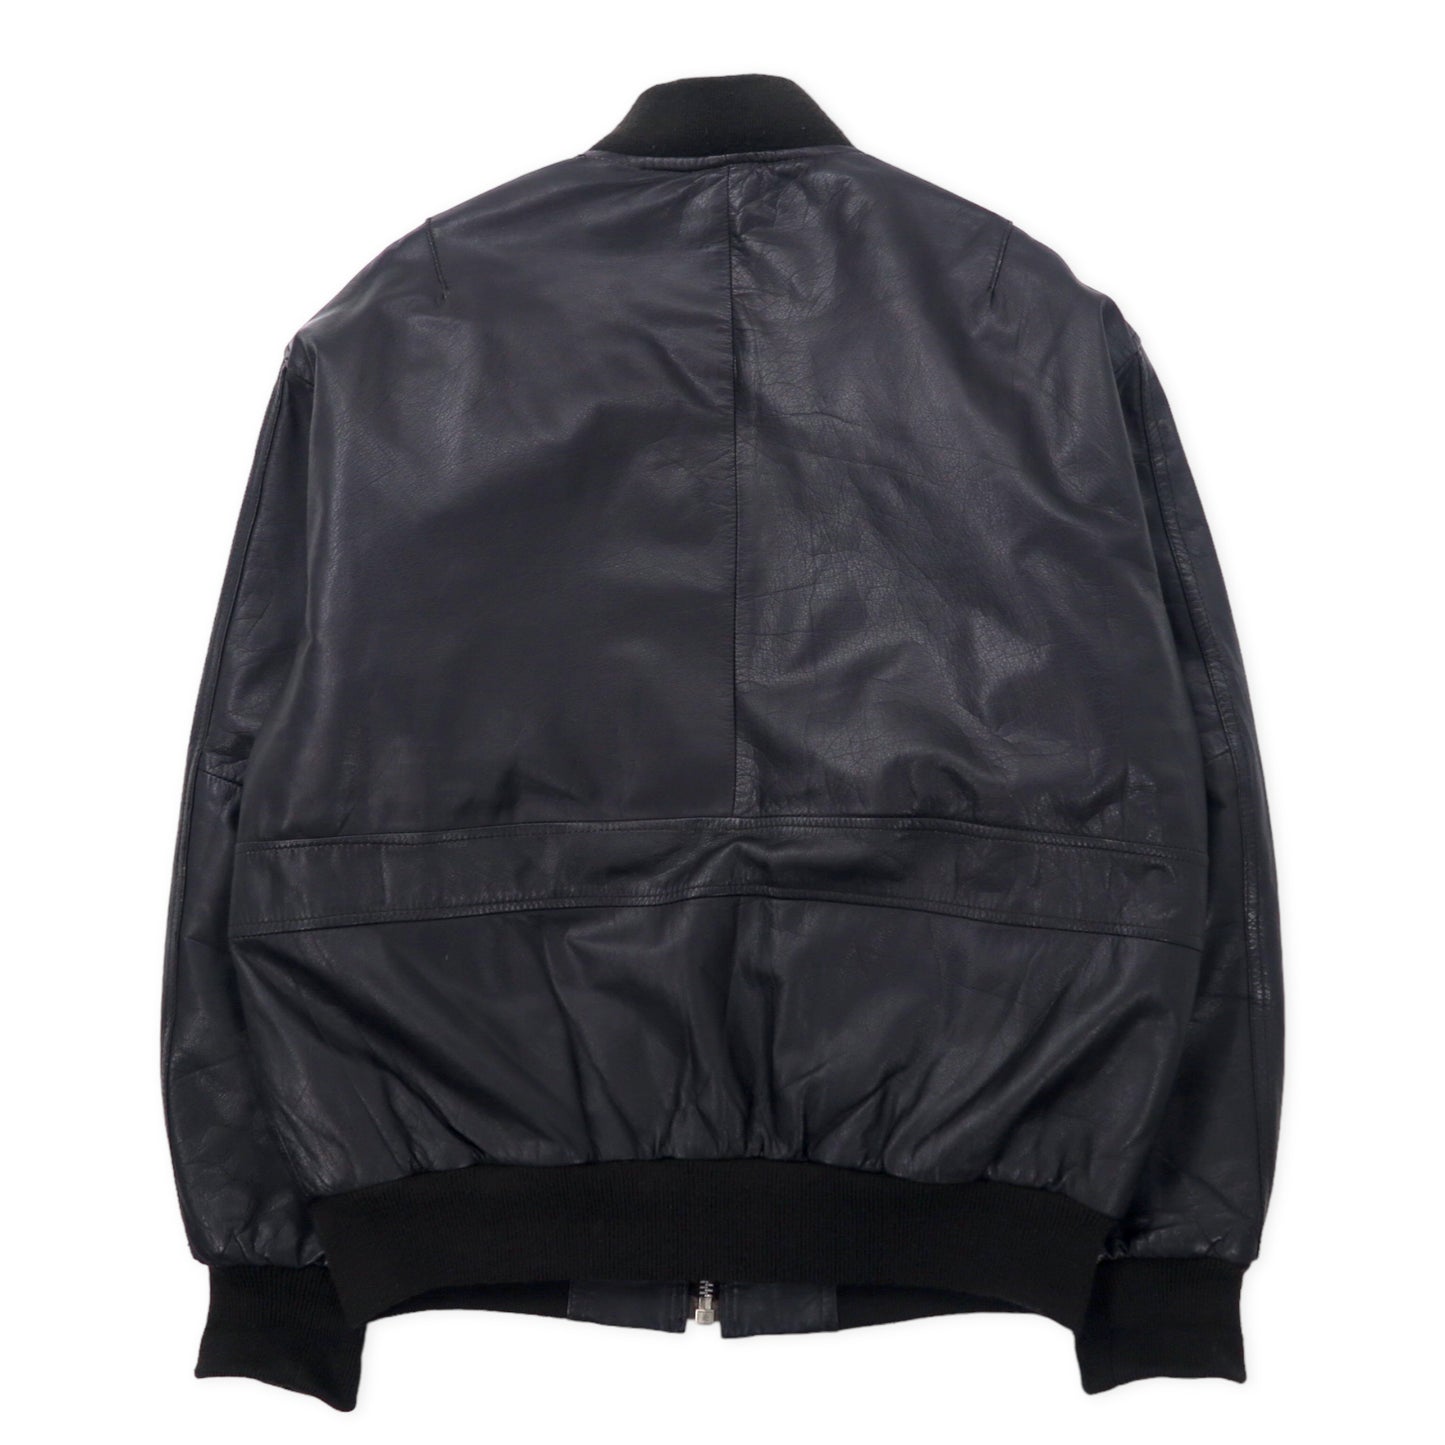 SUB URBAN MA-1 Leather Flight Jacket Bomber Jacket LL Black Cowhide Quilted  Liner